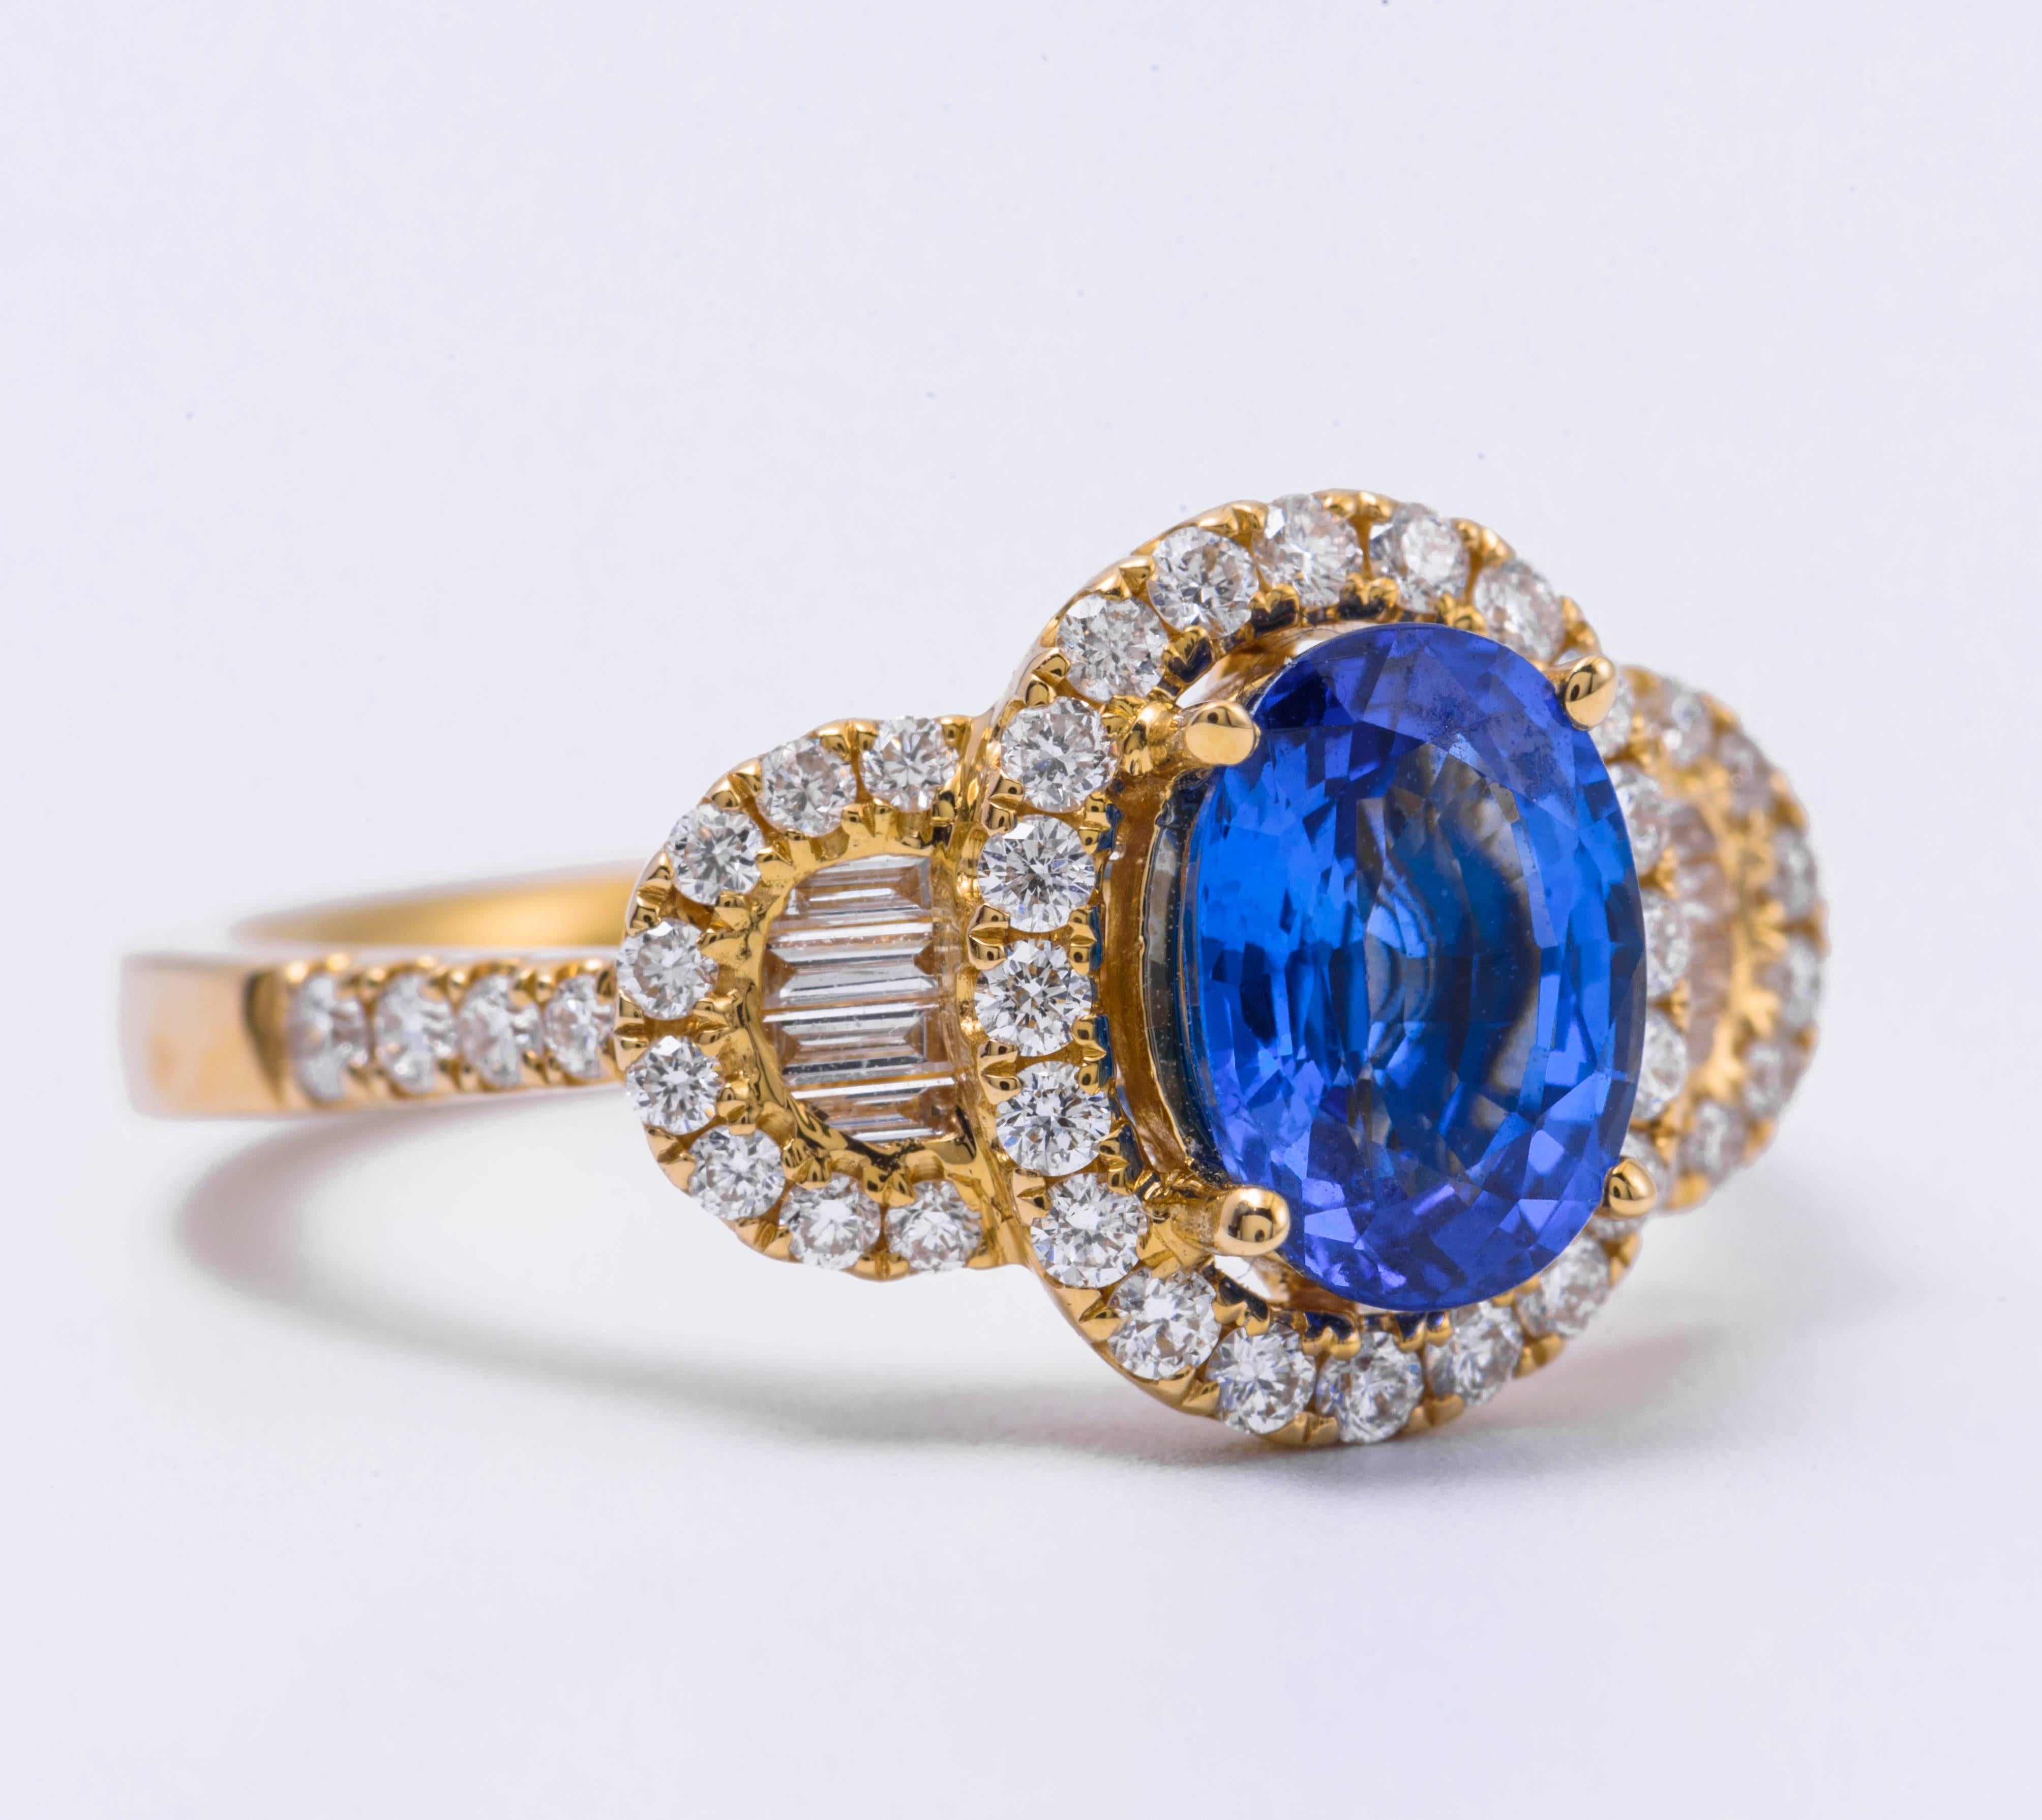 Style:  Oval Shape Ceylon Sapphire and Diamond Halo Engagement Ring
Material: 14 k Yellow Gold
Gemstone Details: 1 Oval Shape Ceylon Sapphire approximately 1.80 ct. 8x6 mm
Diamond Details: Approximately 0.58 ctw of diamonds. Diamonds are G/H in